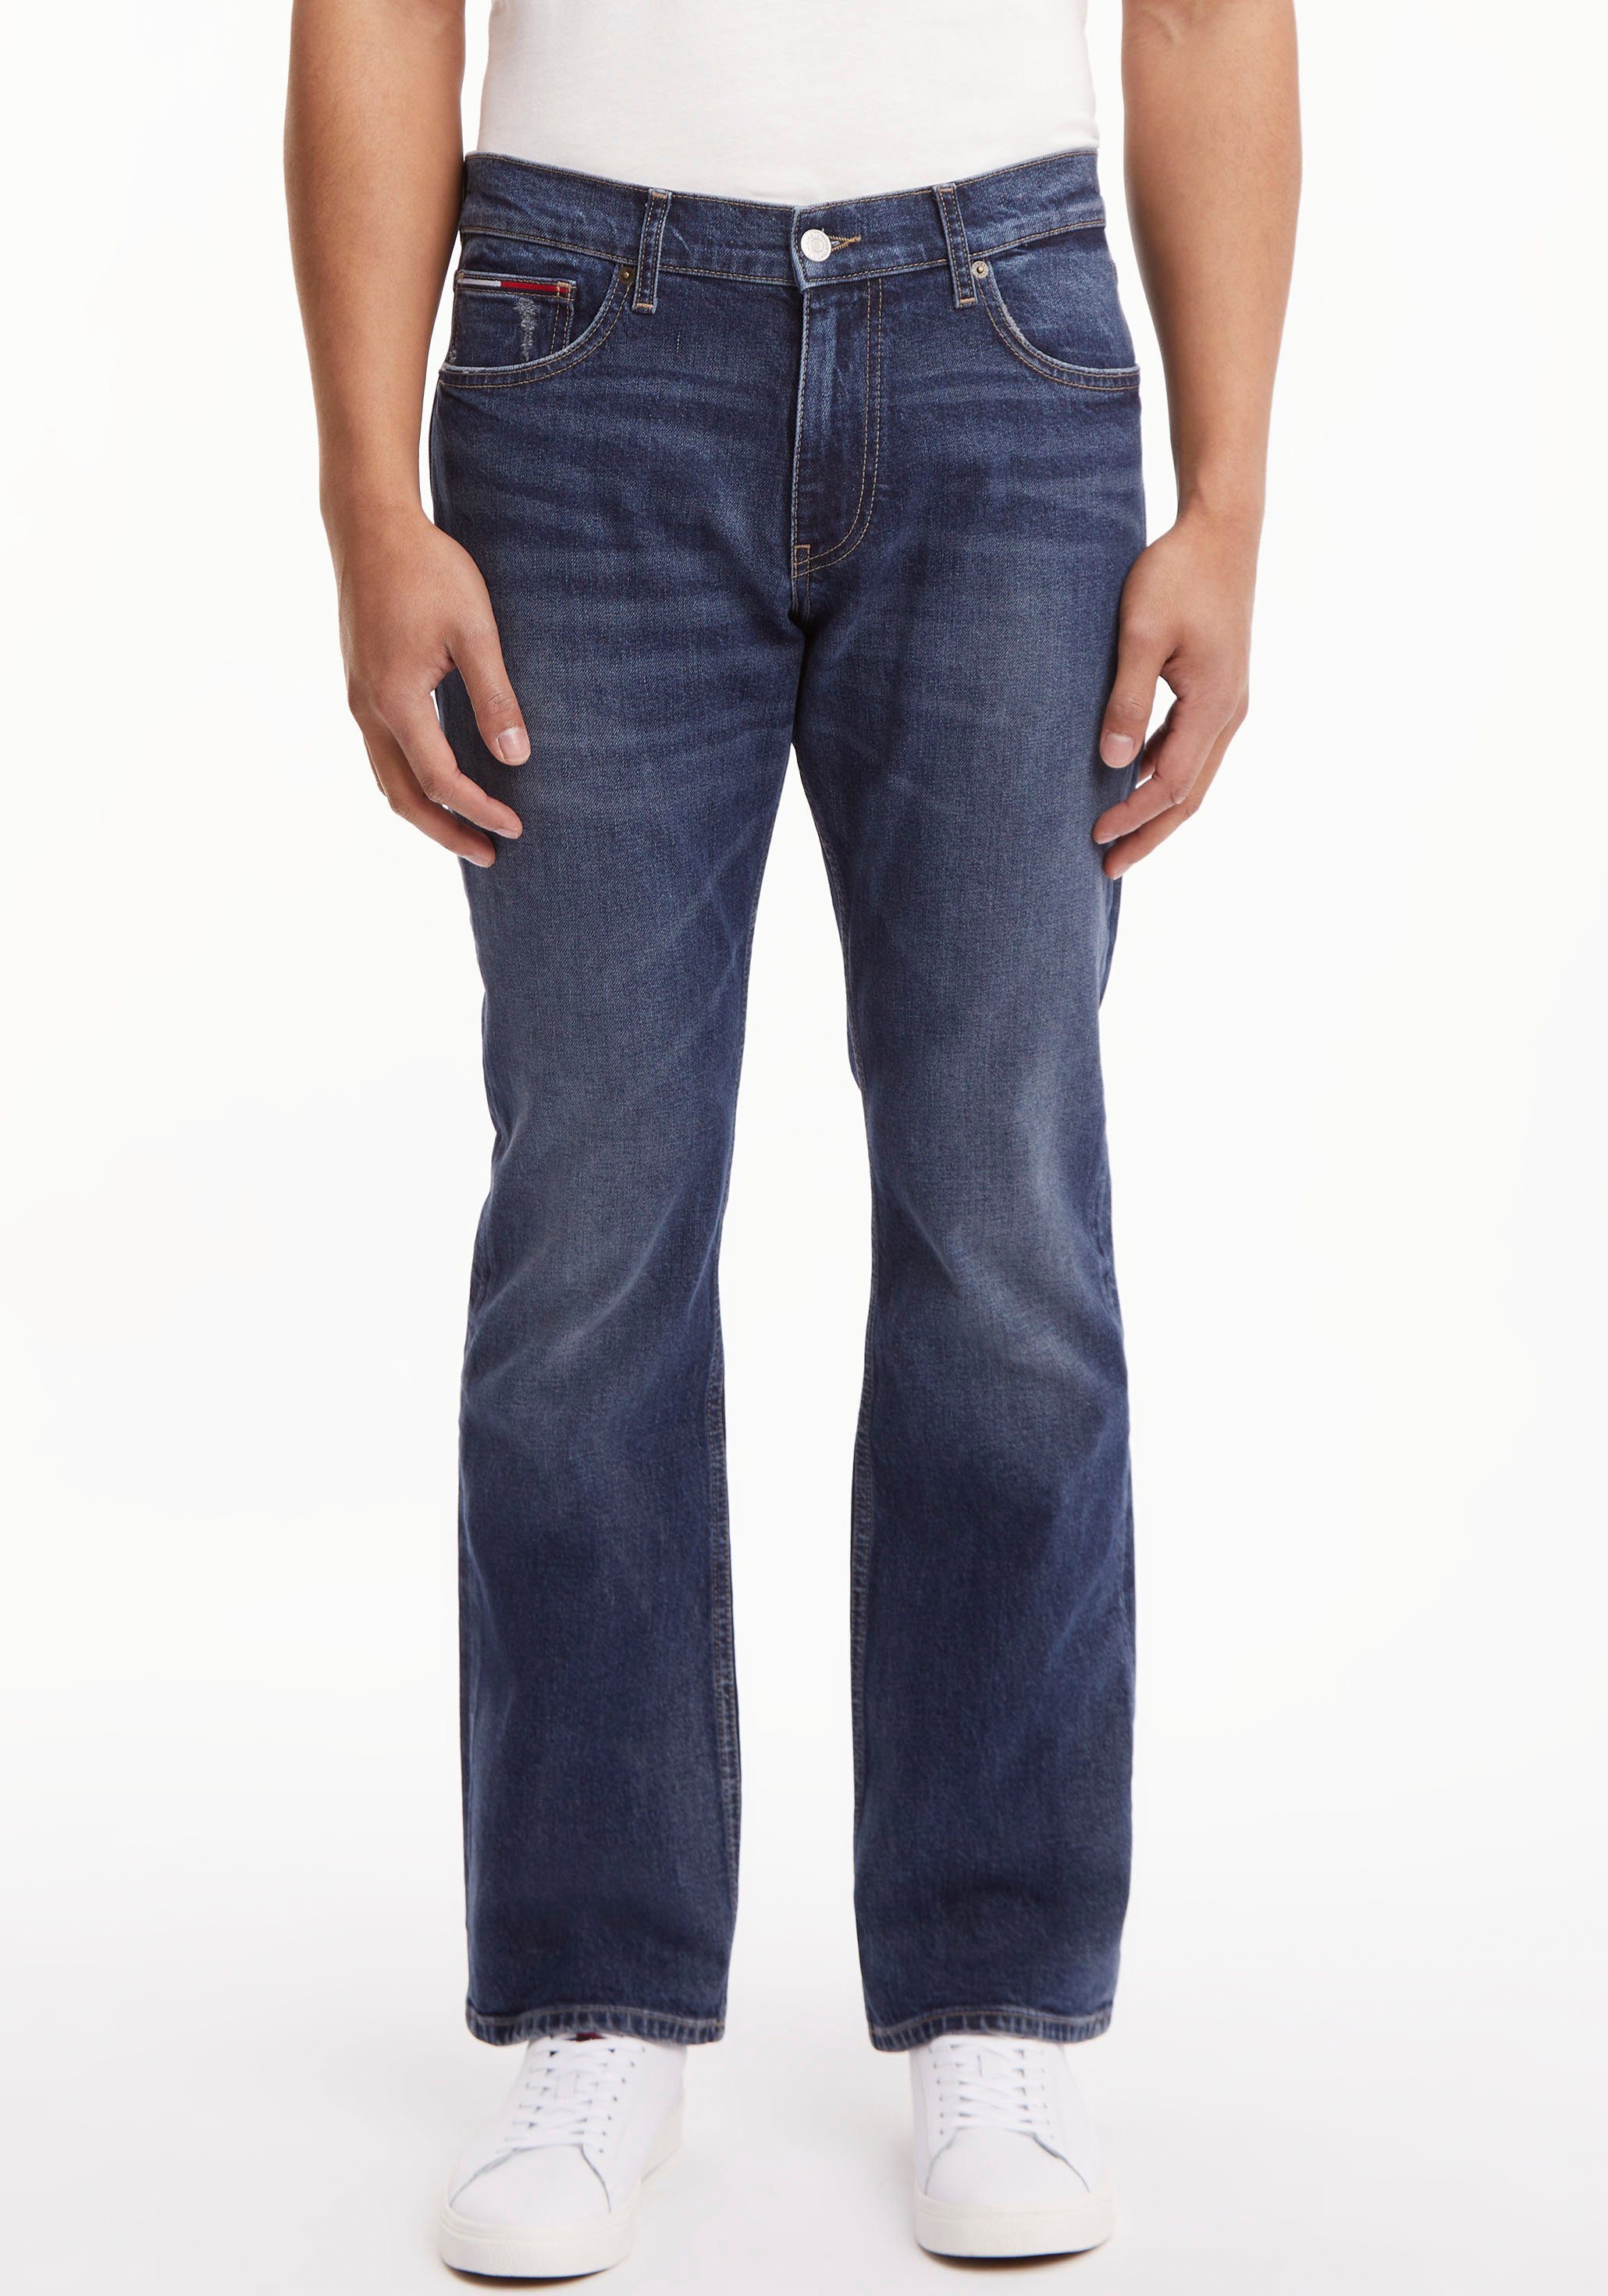 Tommy BOOTCUT Straight-Jeans RGLR blue RYAN BE denim Jeans